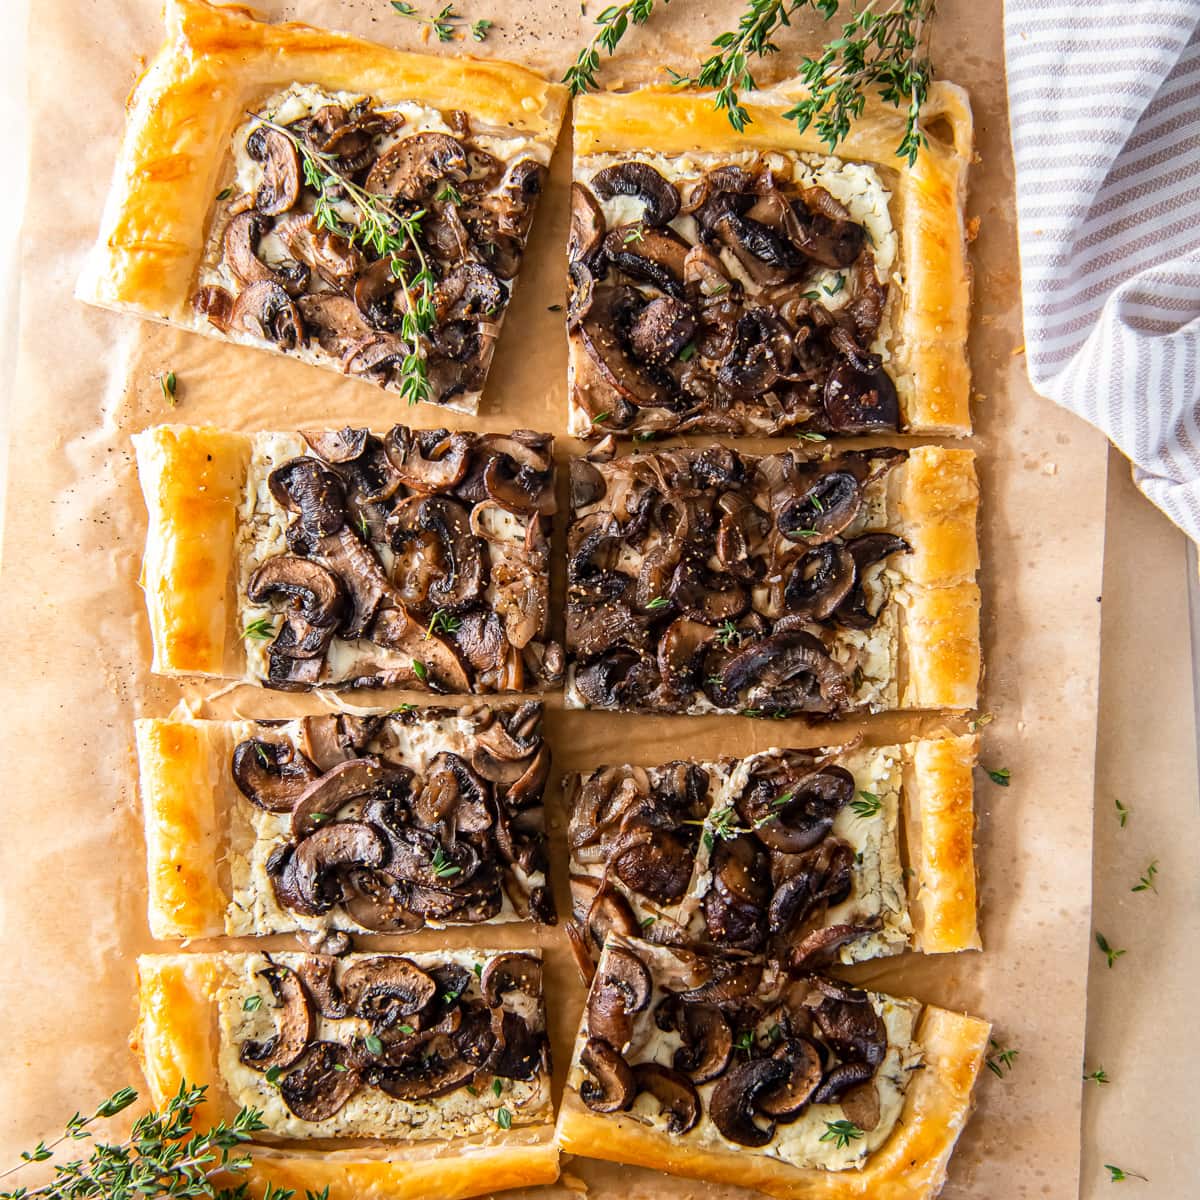 mushroom tart with puff pastry on parchment paper with thyme sprigs.